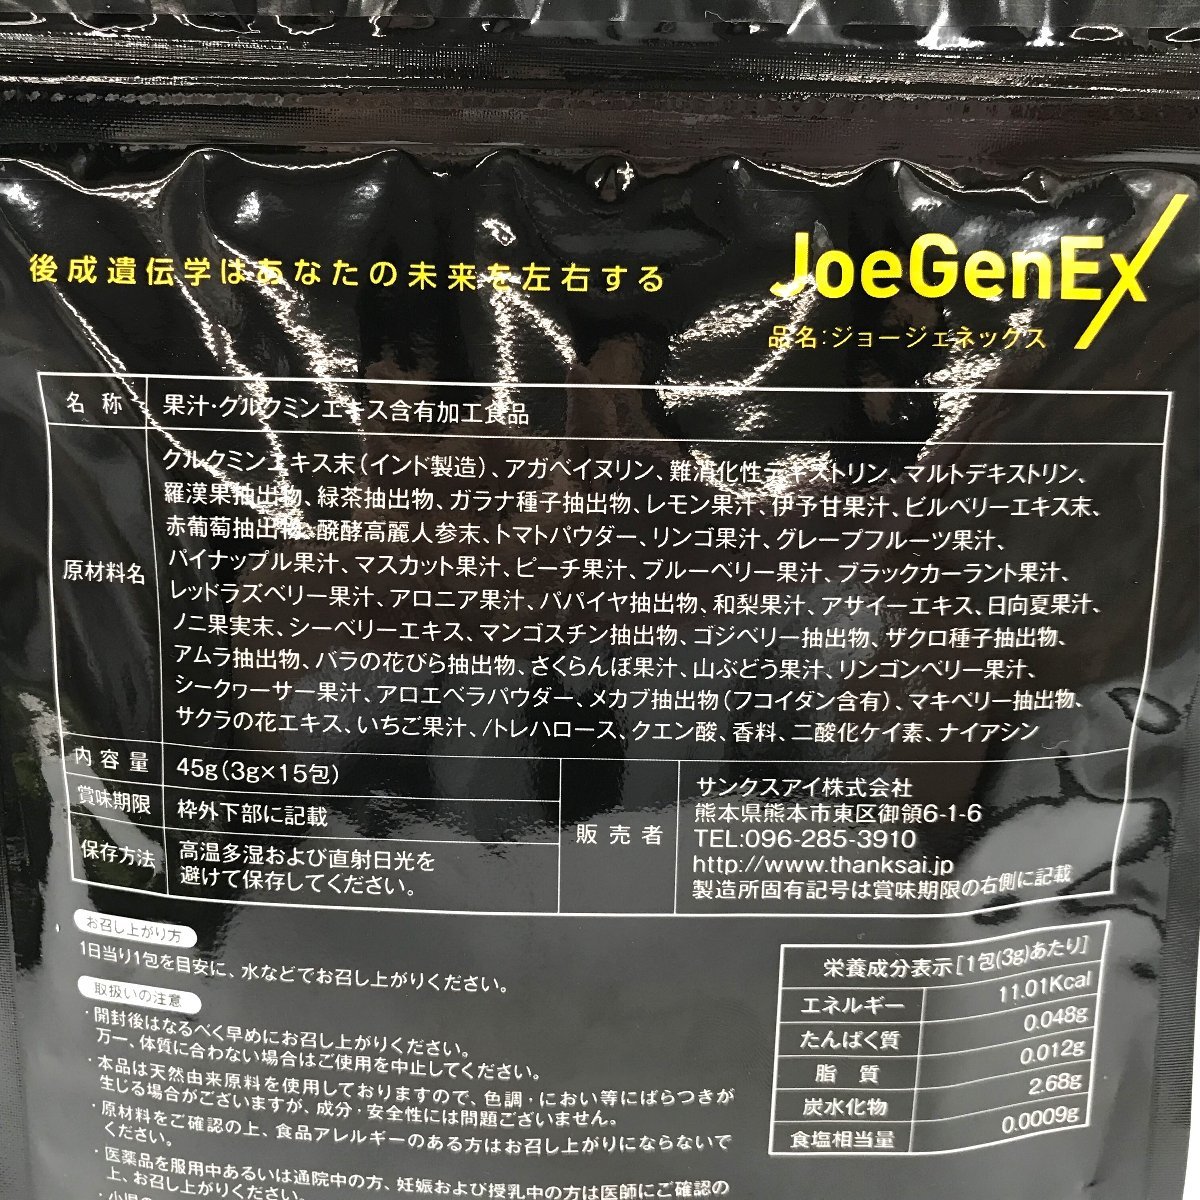 v free shipping thanks I George . neck s15. go in 5 sack set best-before date 2024 year 10 month 18 day regular price 110000 jpy ( tax included ) THANKS AI unopened 